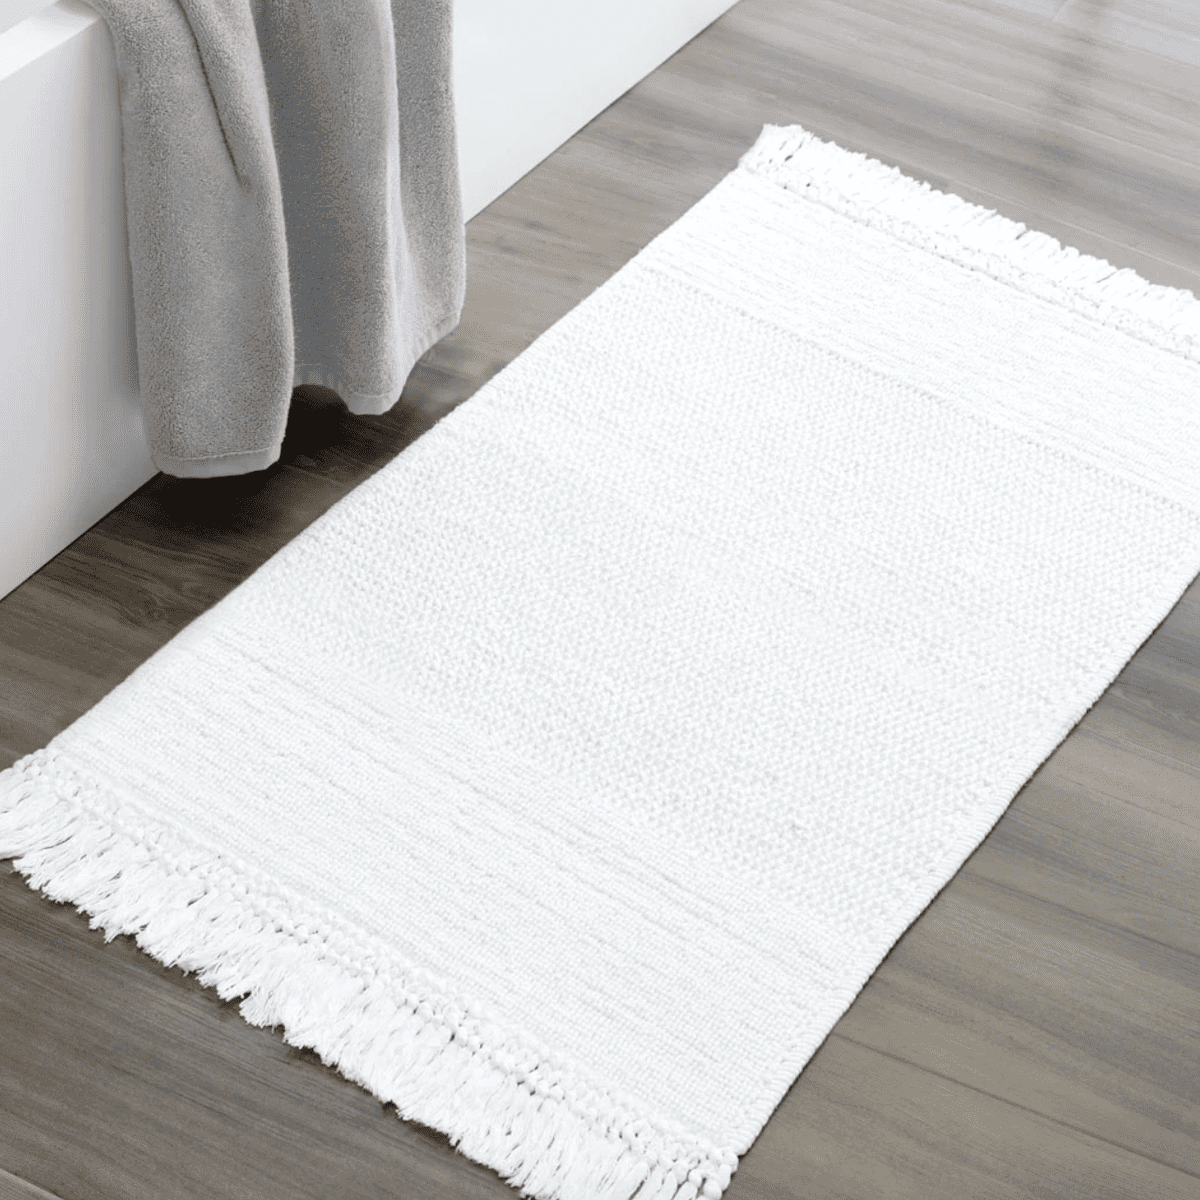 The Ultimate Guide to Bath Rugs and Mats: Top 10 Products to Keep Your  Bathroom Safe and Stylish